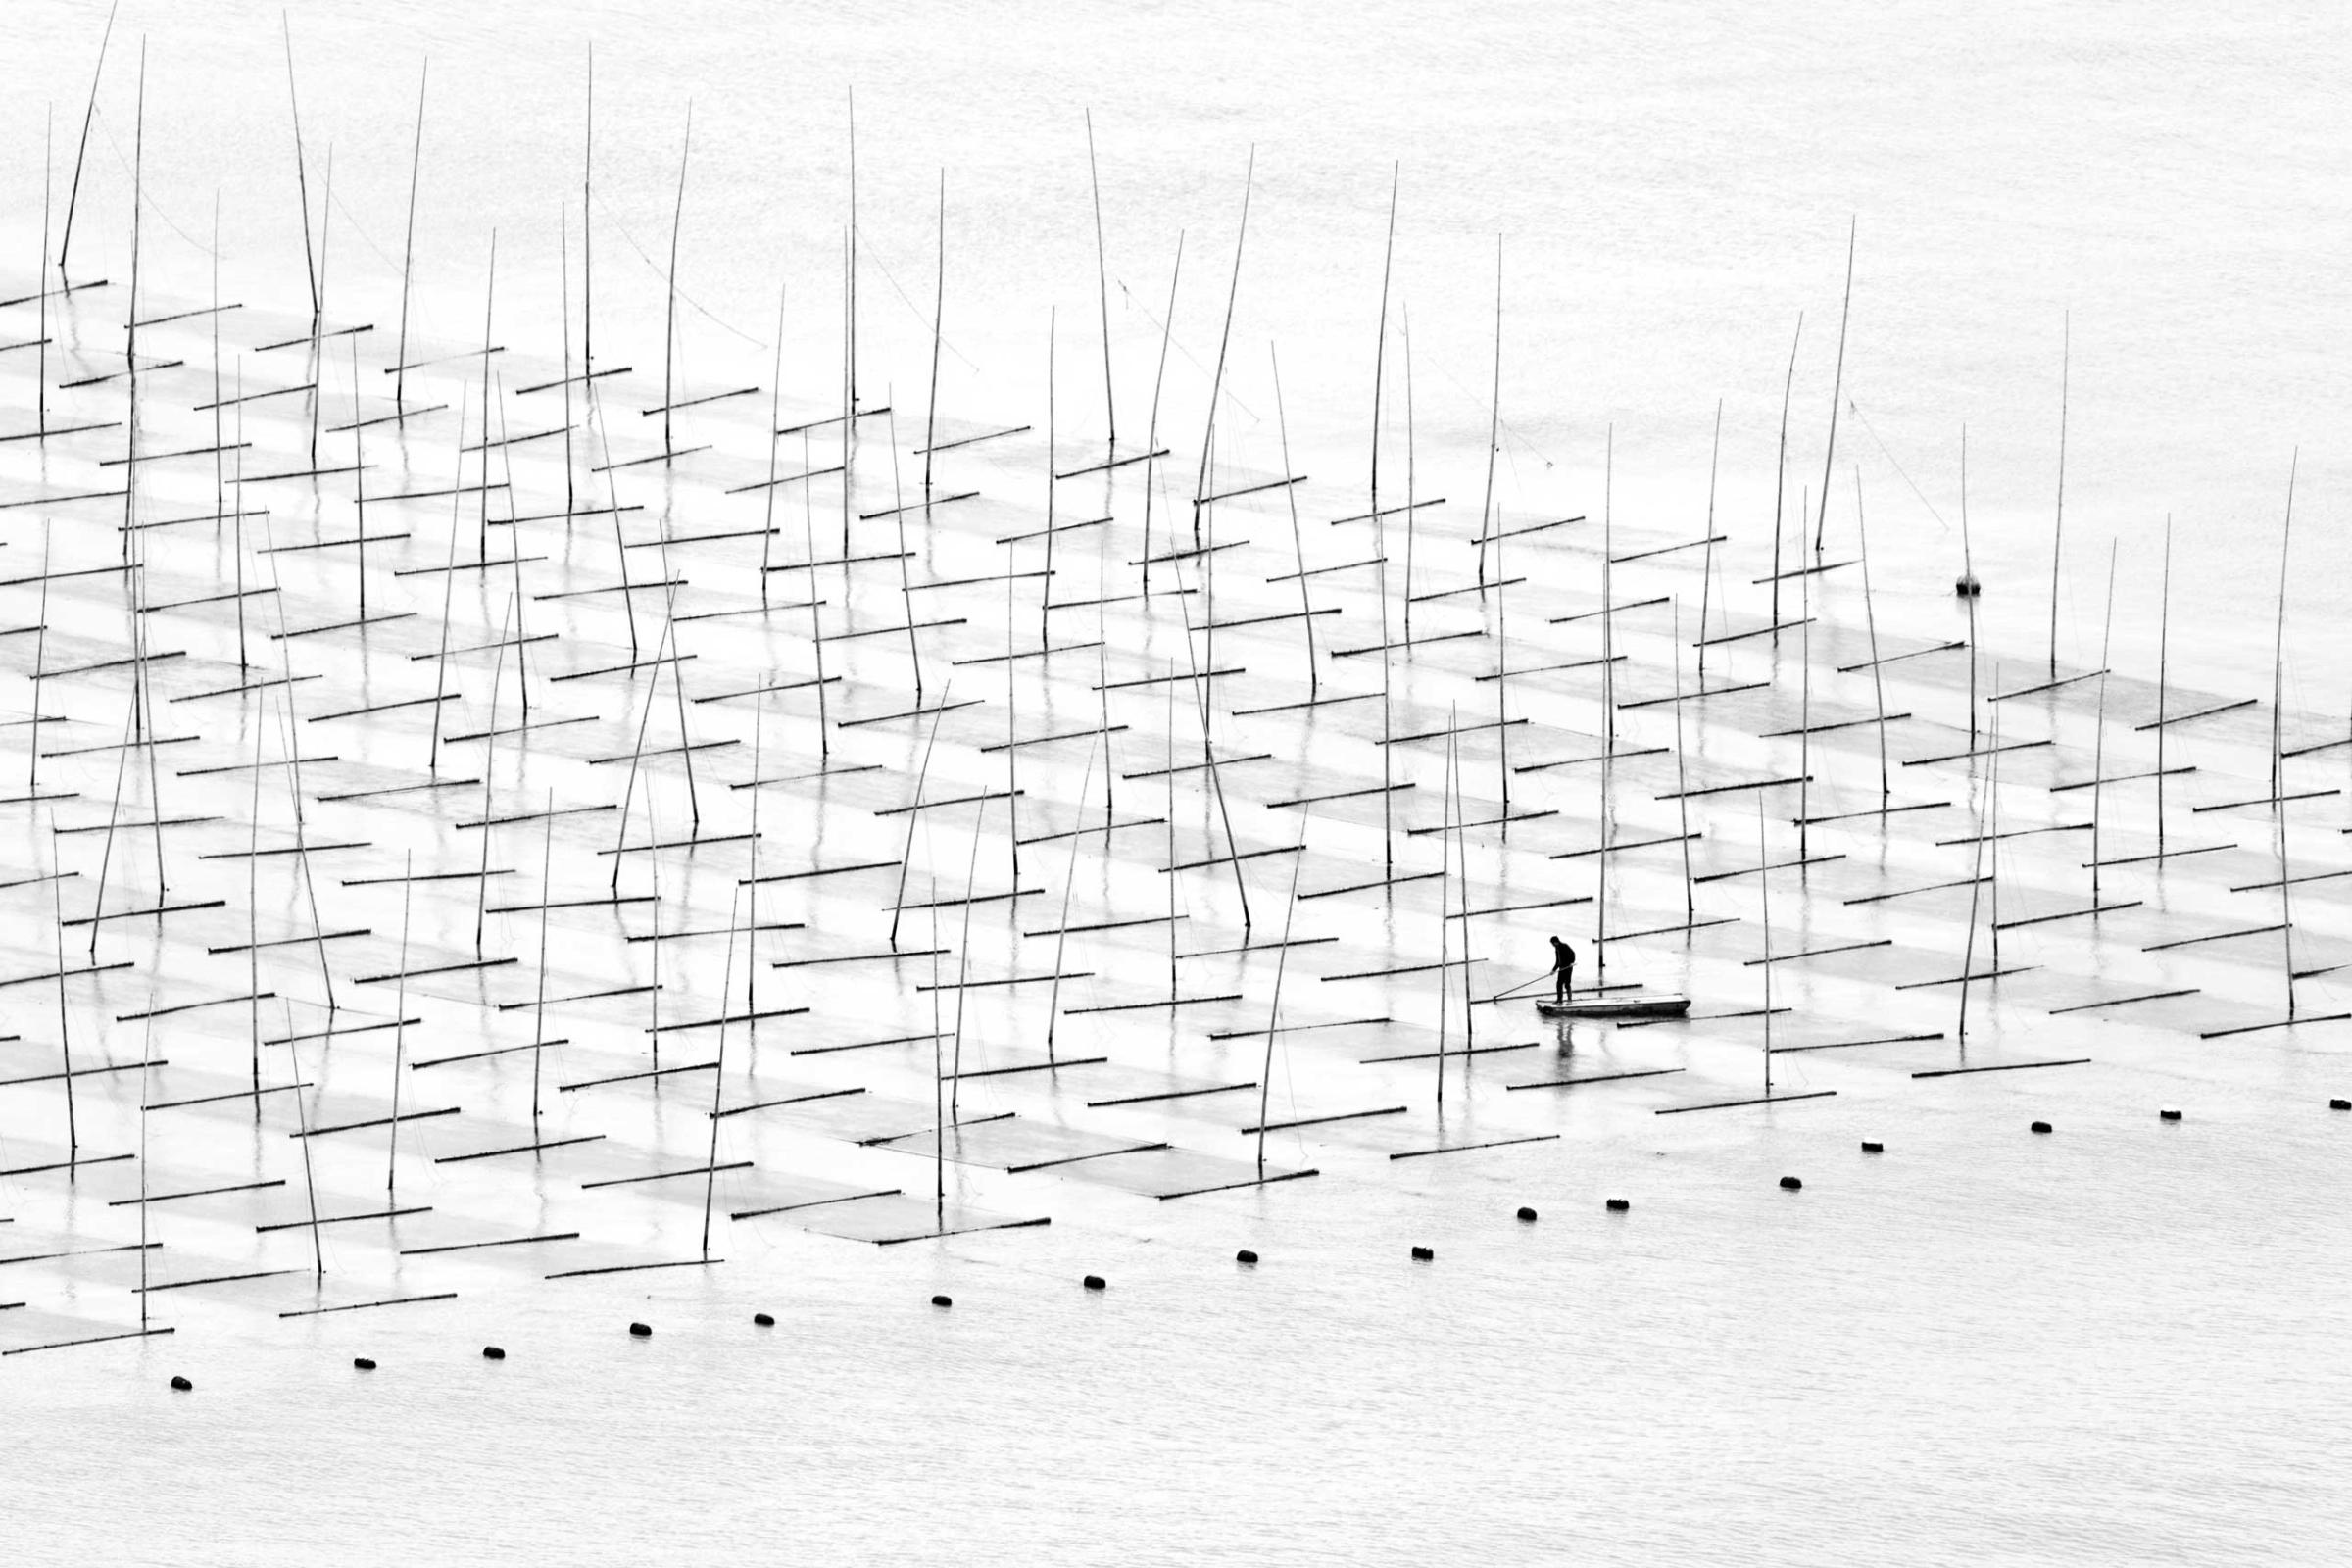 A fisherman is farming the sea in between the bamboo rods constructed for aquaculture off the coast in southern China.